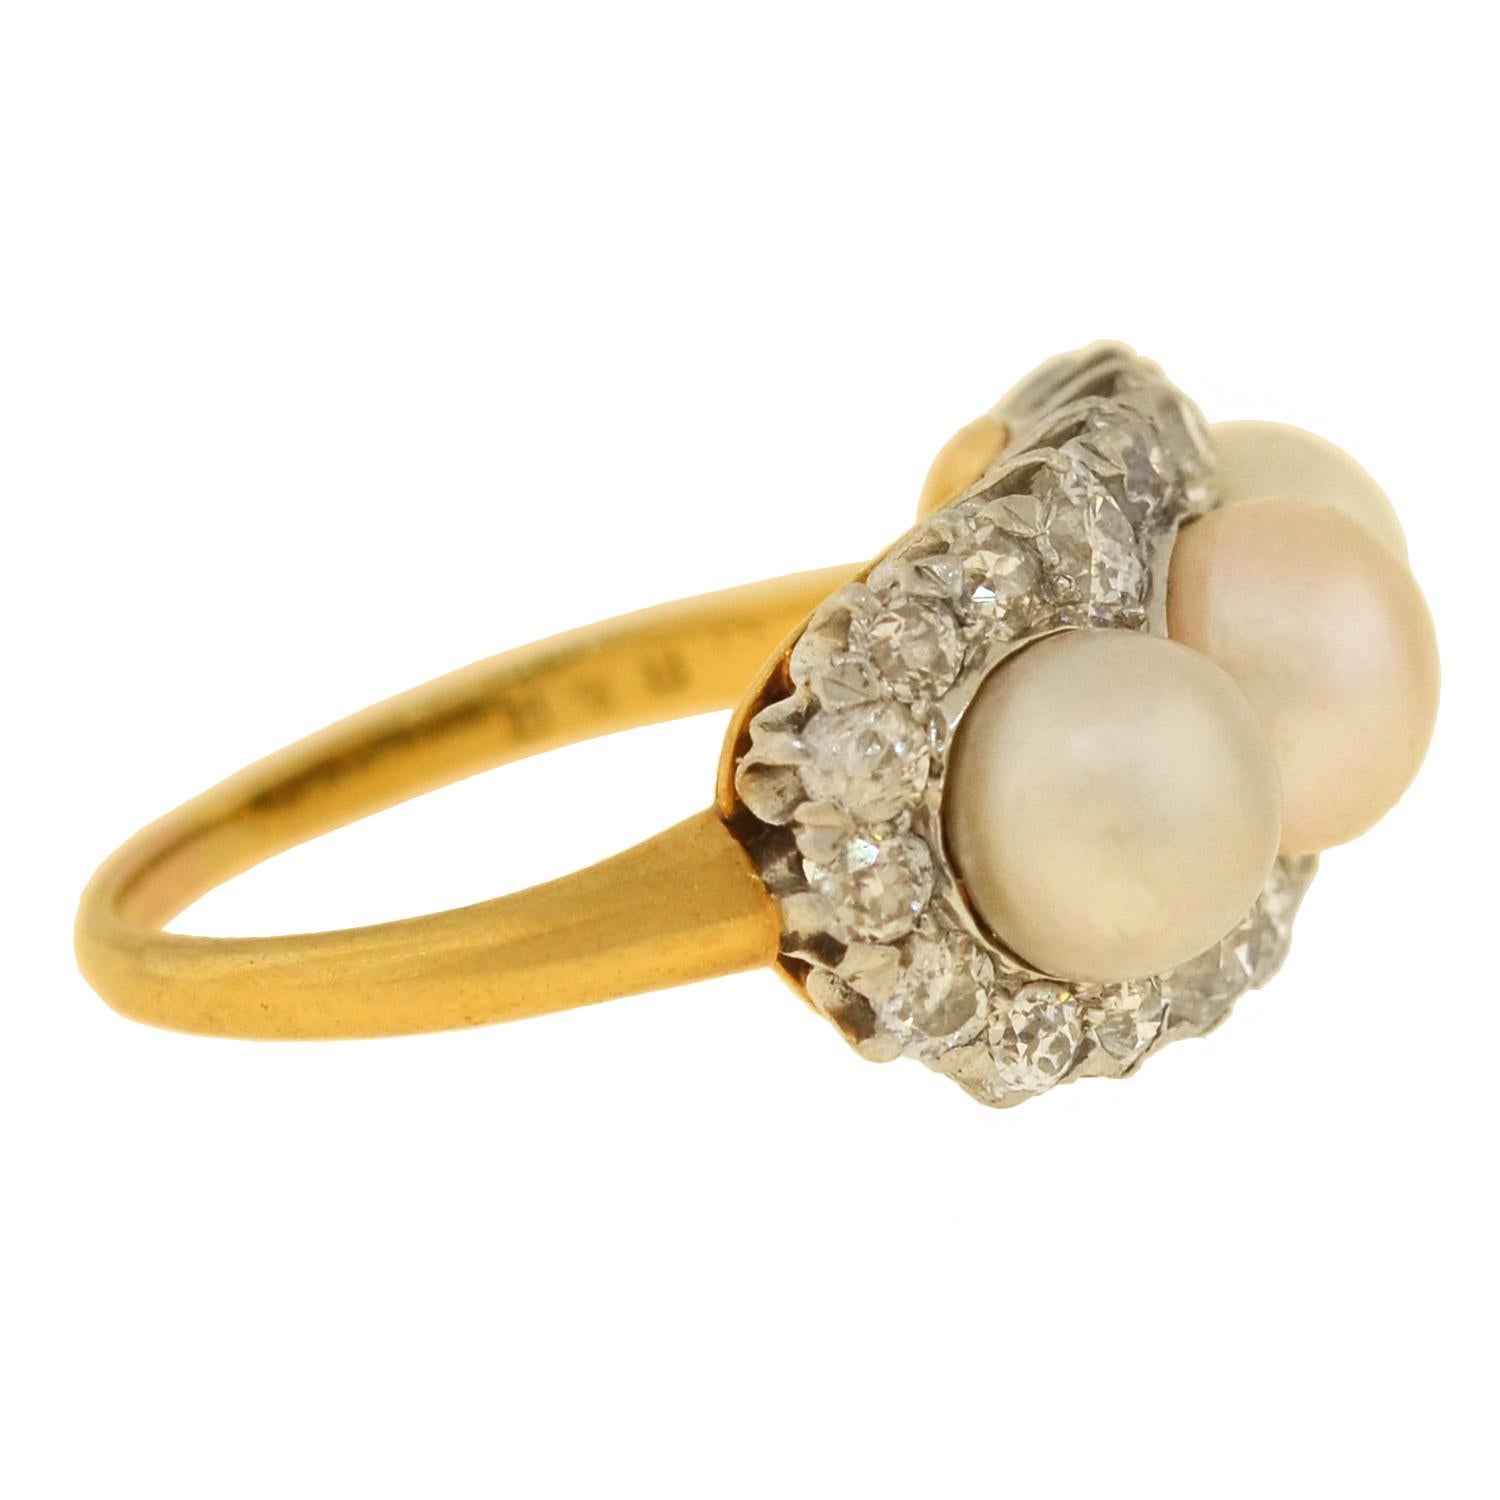 A stunning pearl and diamond ring from the Edwardian (ca1910) era! This fabulous ring is crafted in vibrant 18kt gold and topped in platinum for a stylish two-tone look. Resting in the center of the ring are three natural pearls, which are